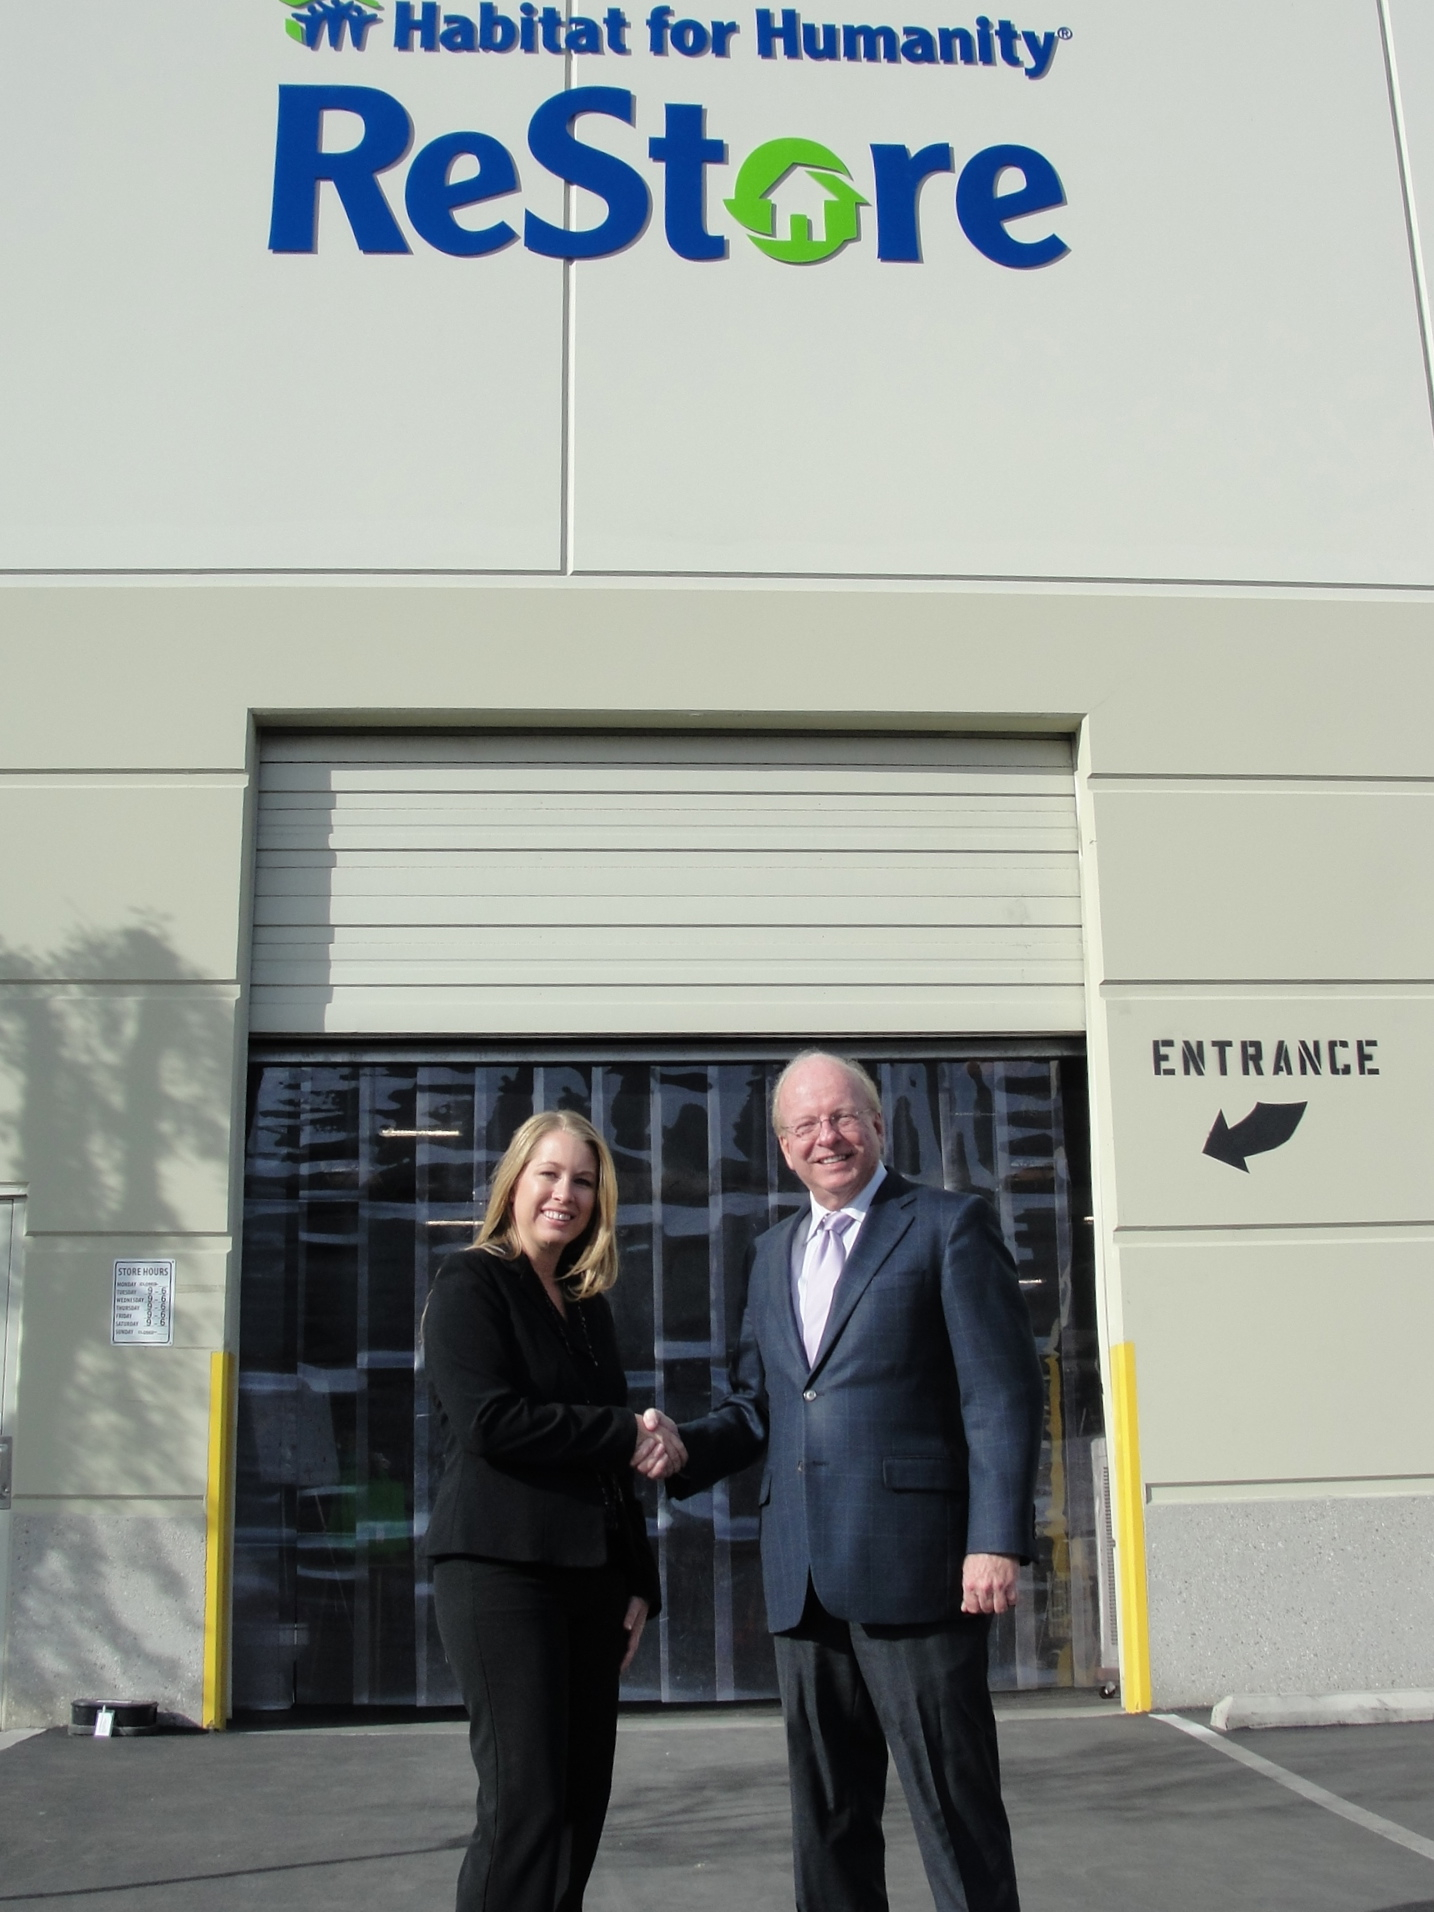 Rhea Stumm is the new ReStore manager.  She is welcomed by Dennis Baxter, executive director of Habitat for Humanity San Bernardino Area, Inc.  